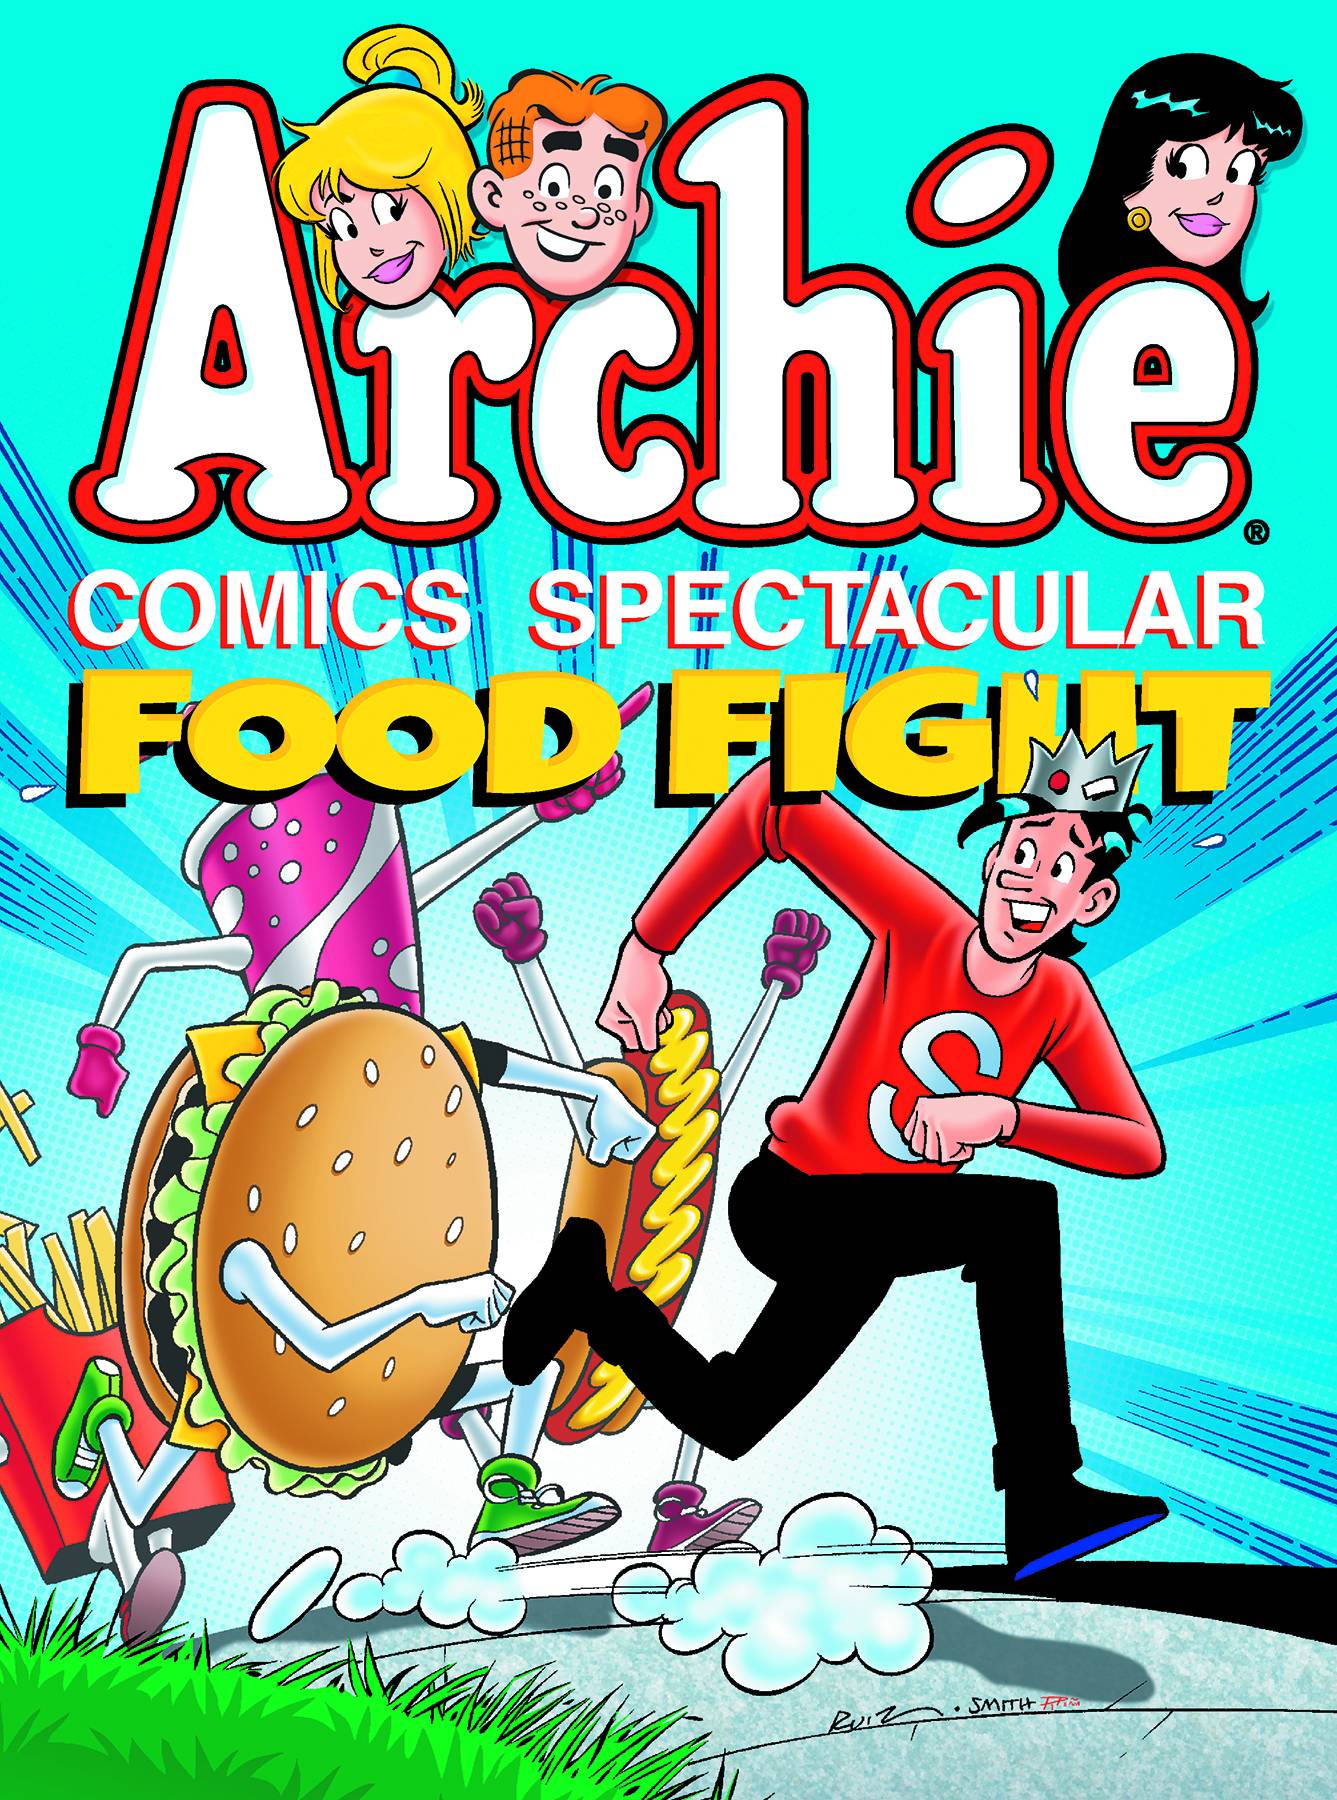 Archie Comics Spectacular Food Fight Graphic Novel